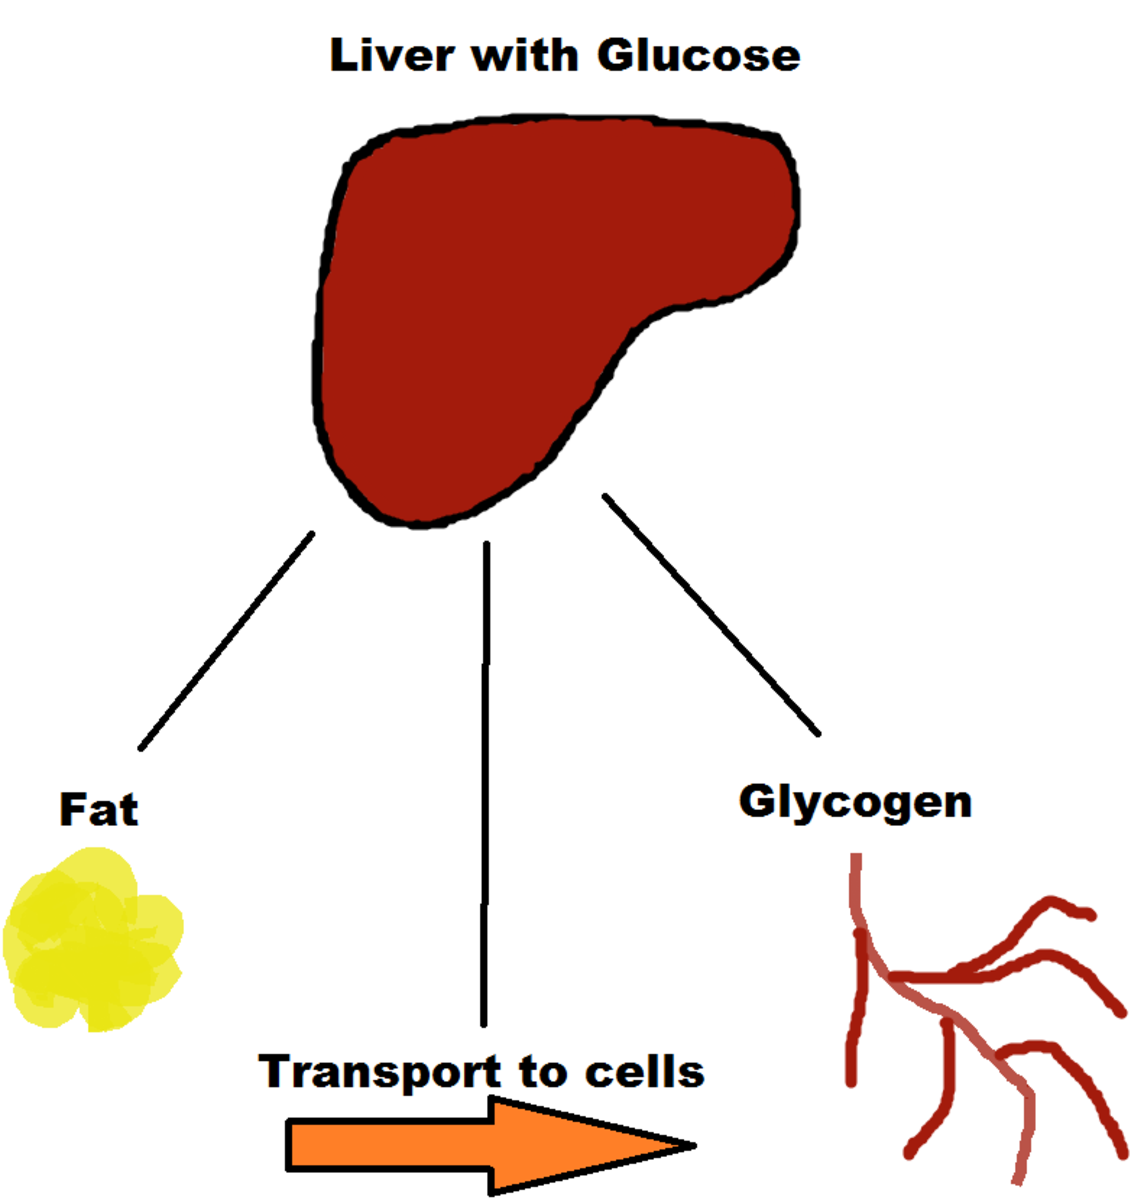 The liver can store excess glucose as fat or glycogen, or it can send it off to other cells in the body that need it.